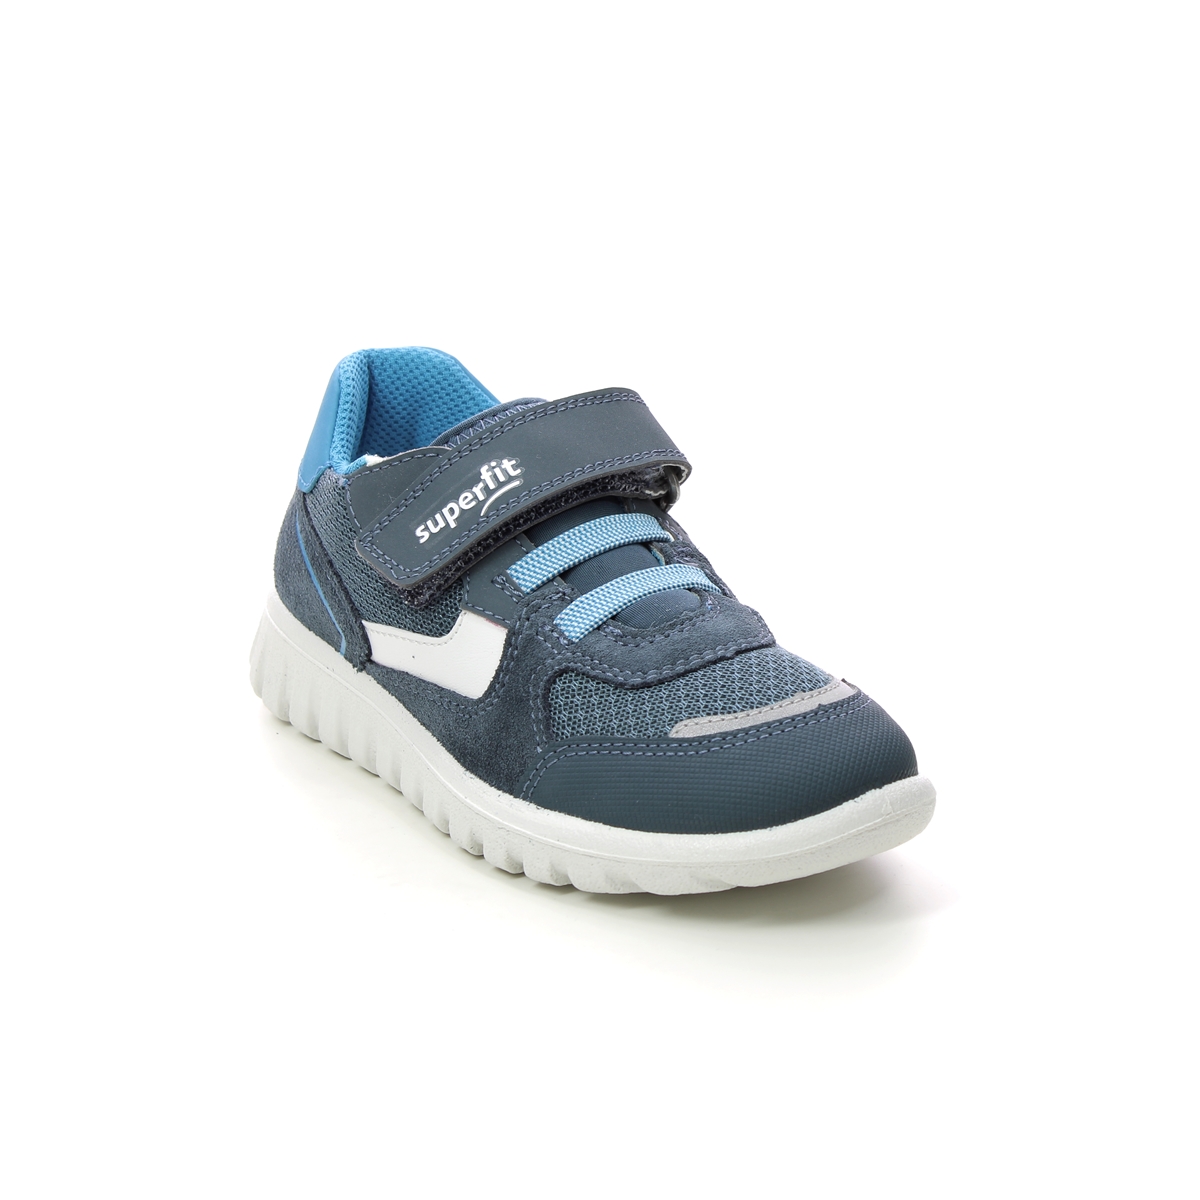 Superfit Sport7 Mini Bungee Navy Kids Trainers 1006195-8030 In Size 26 In Plain Navy For kids